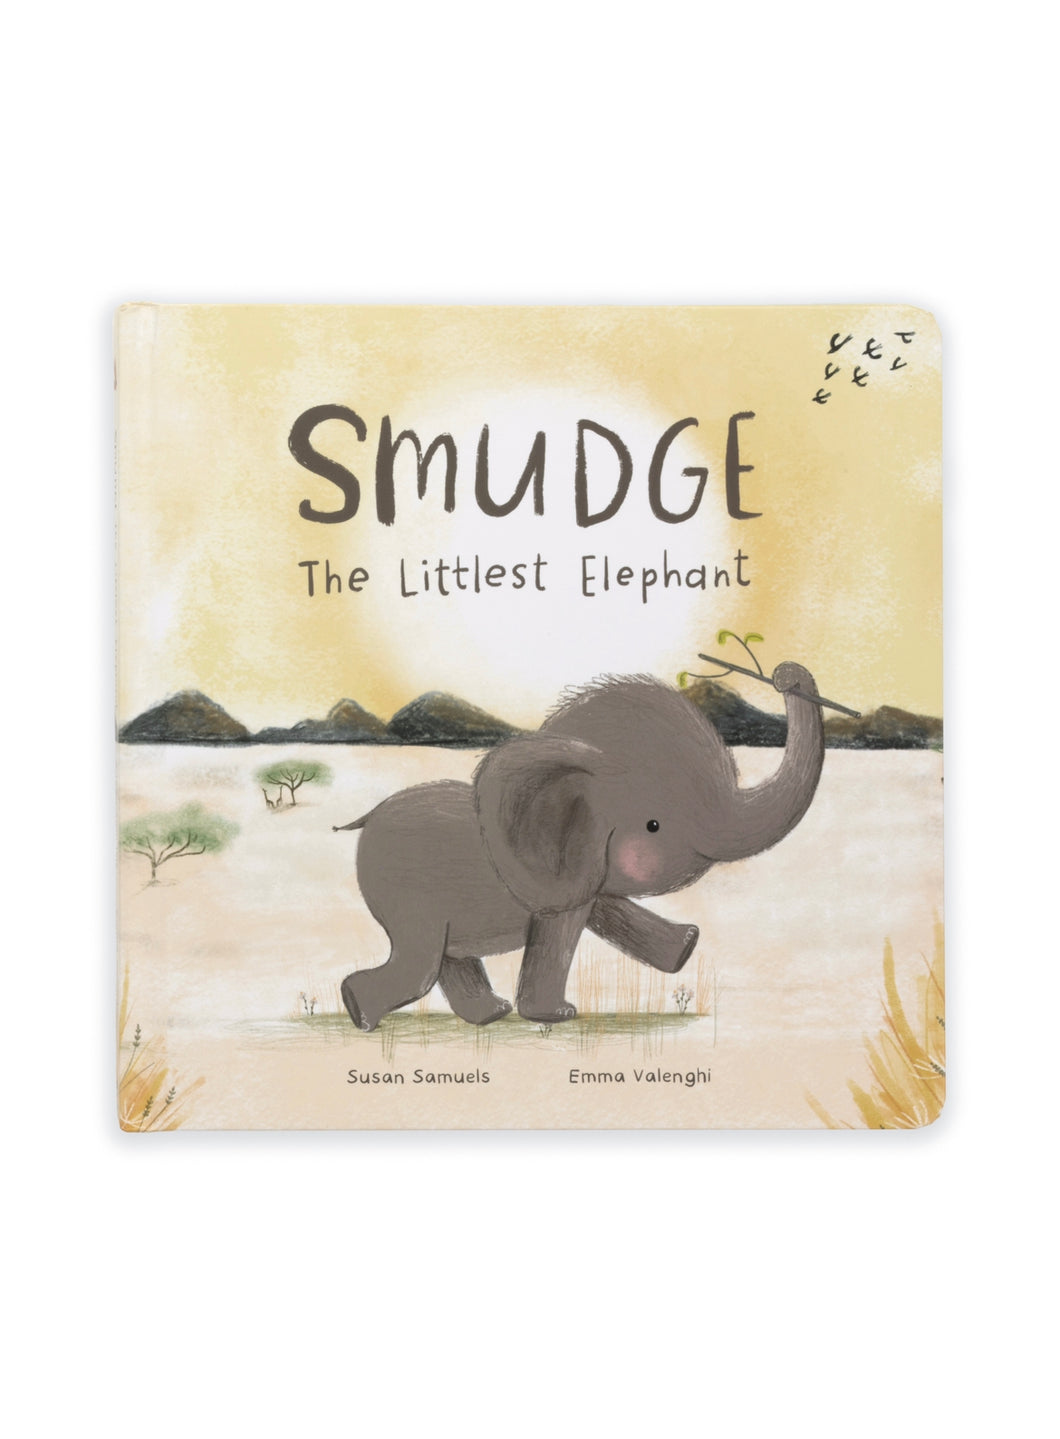 Book - Smudge the Littlest Elephant